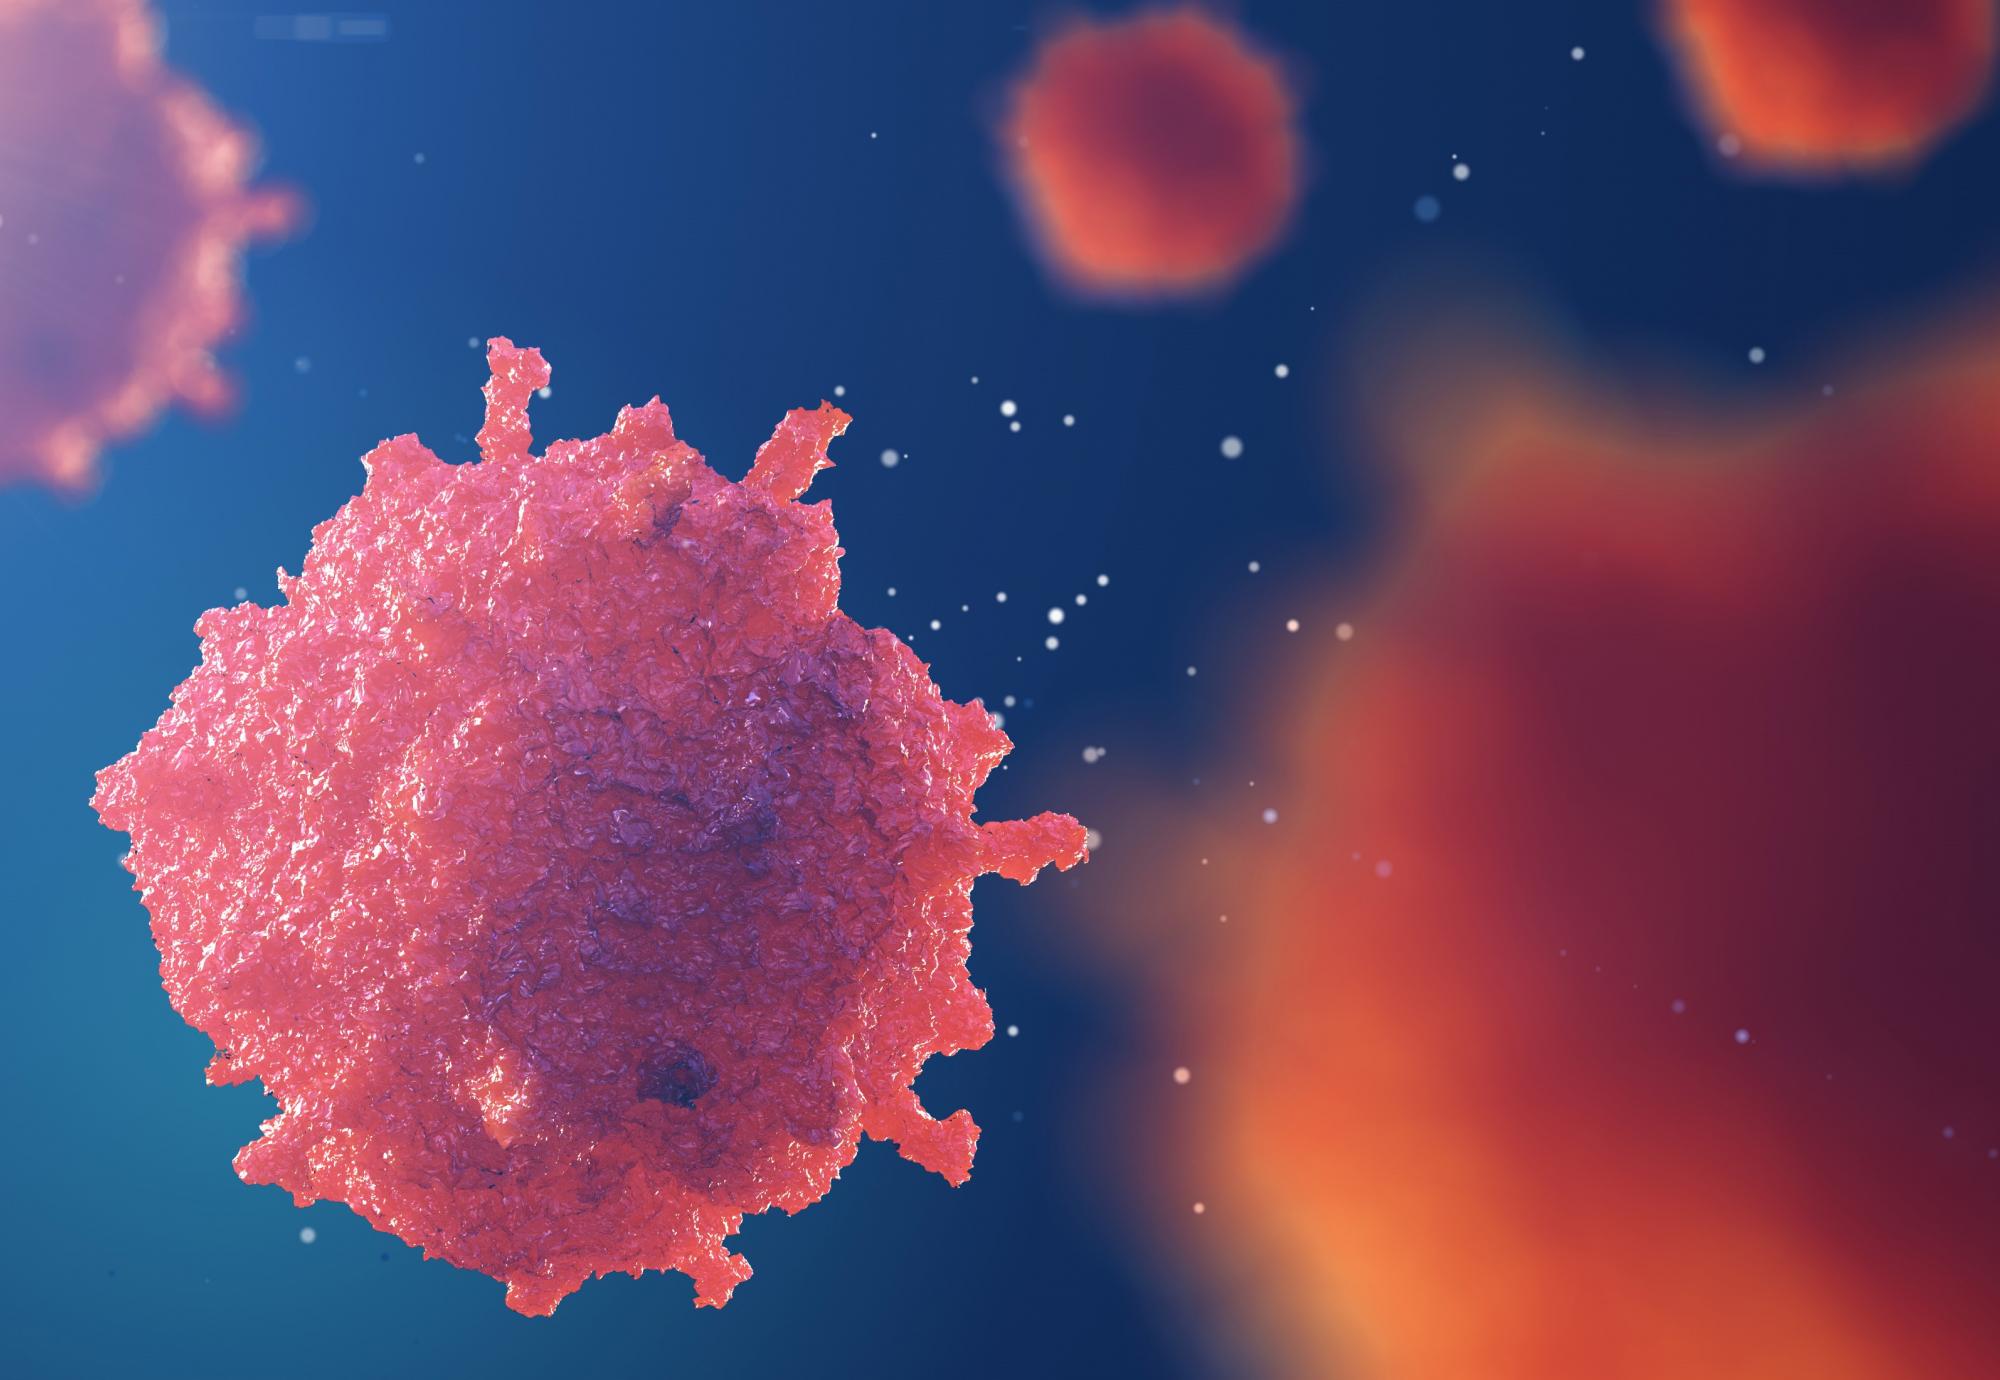 Artist impression of a blood cancer cell close up